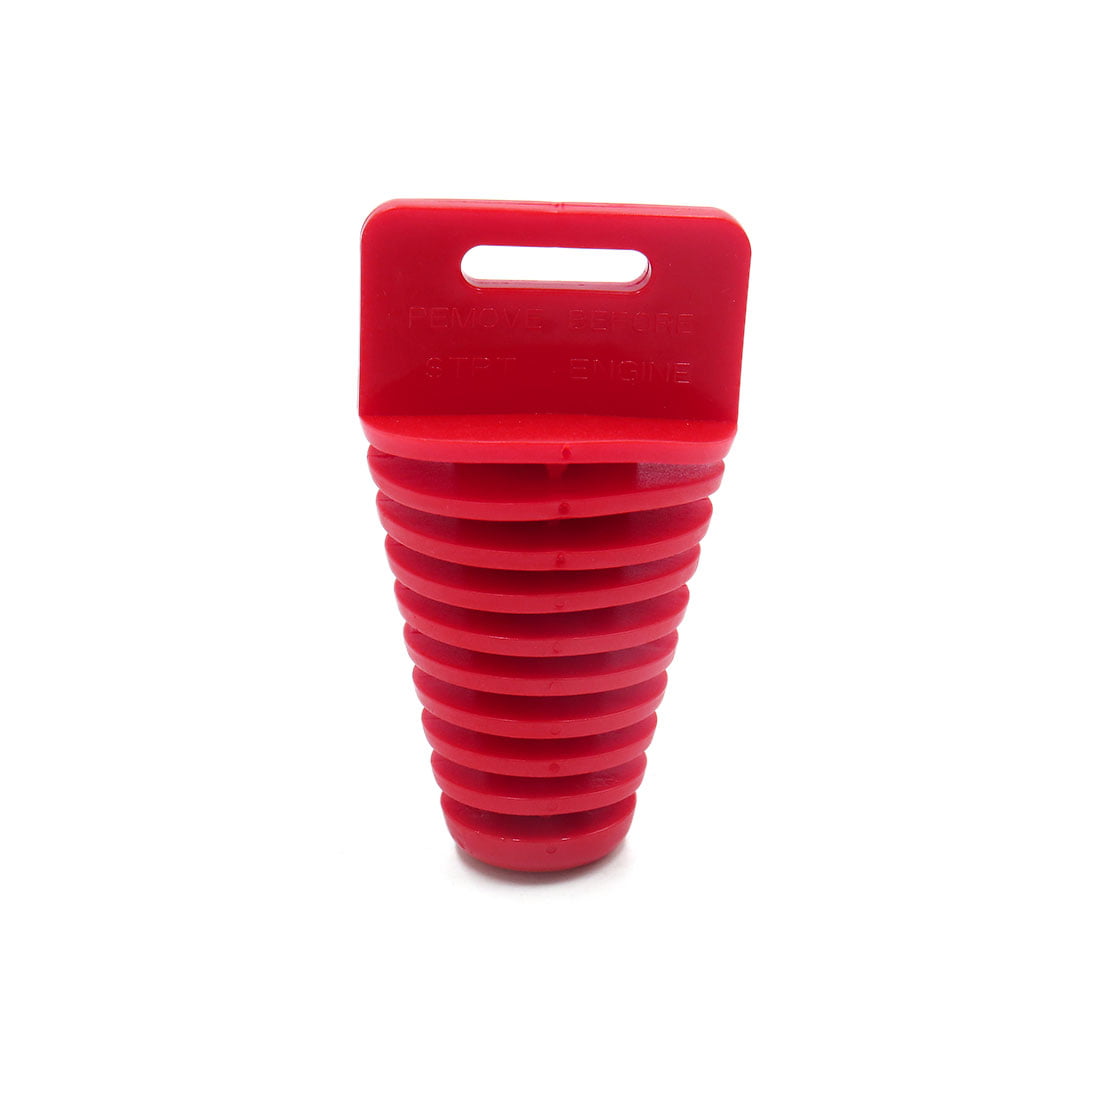 Red Exhaust Silencer Wash Plug for Motorcycle Dirt Street Sport ATV Bike 33-62mm